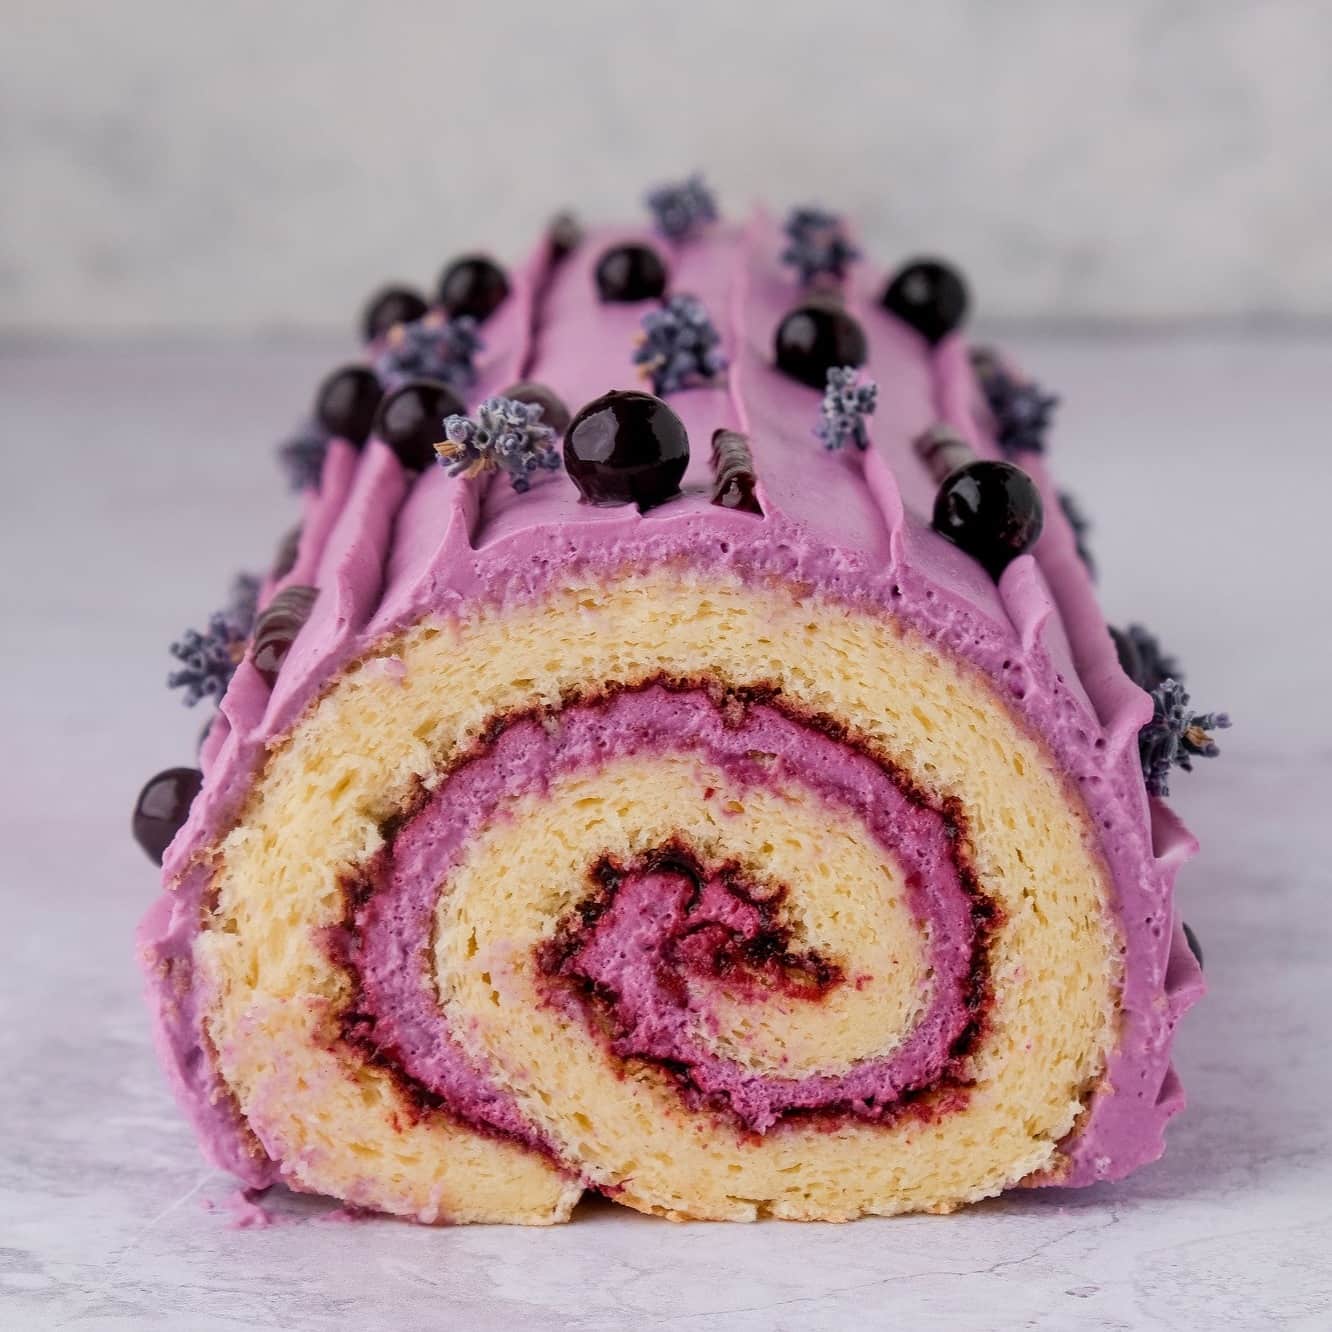 the Blackcurrant and Lavender Roll Cake